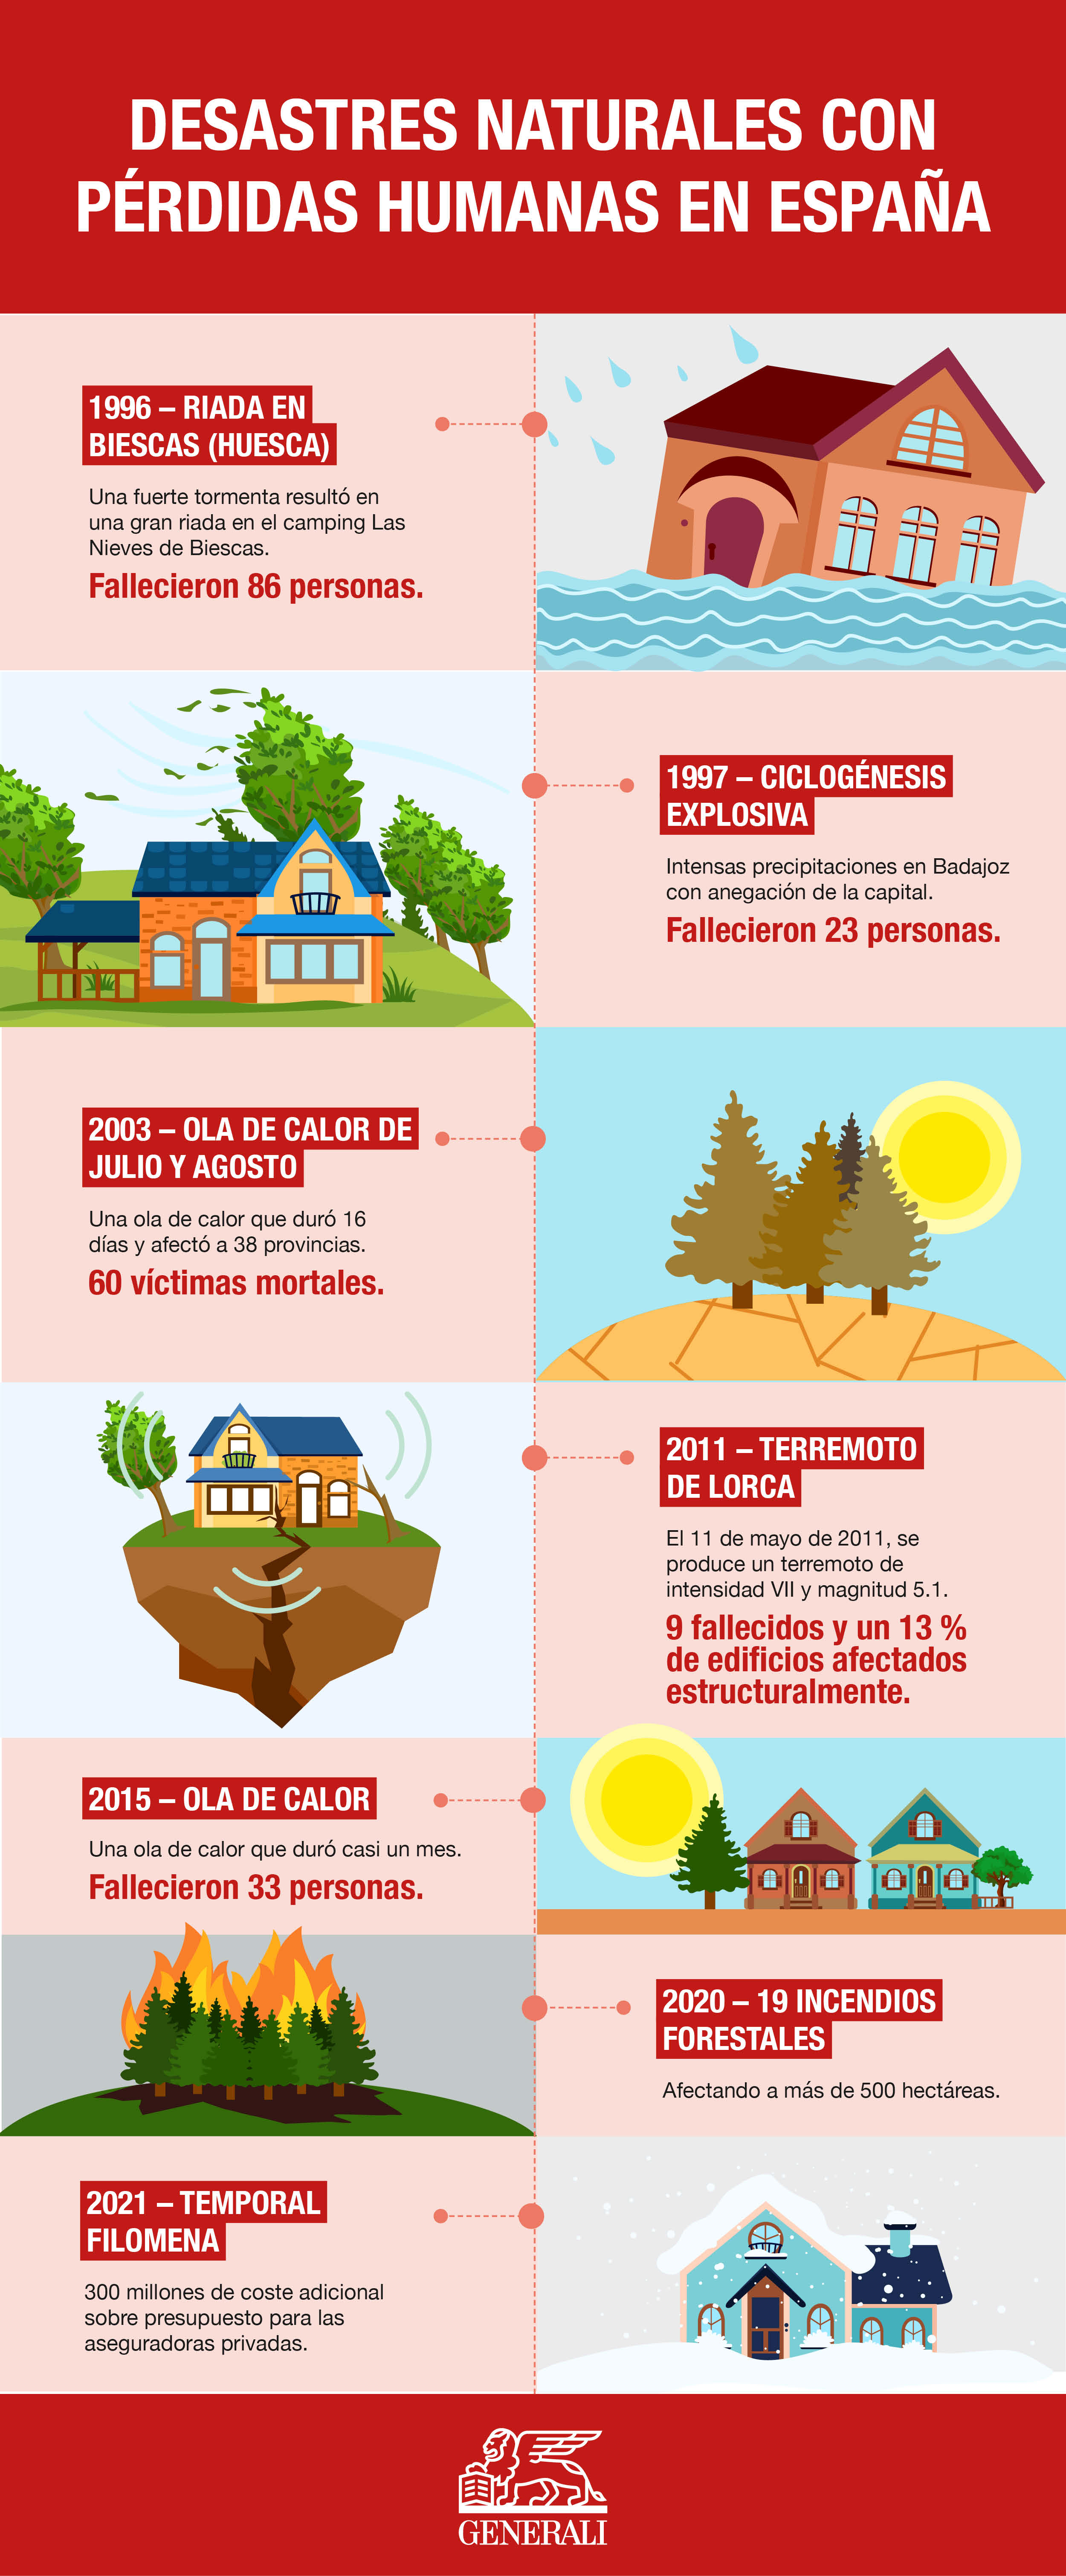 Generali_Damage from Weather_Infographic_SPAIN_10.12.21 (1).jpg